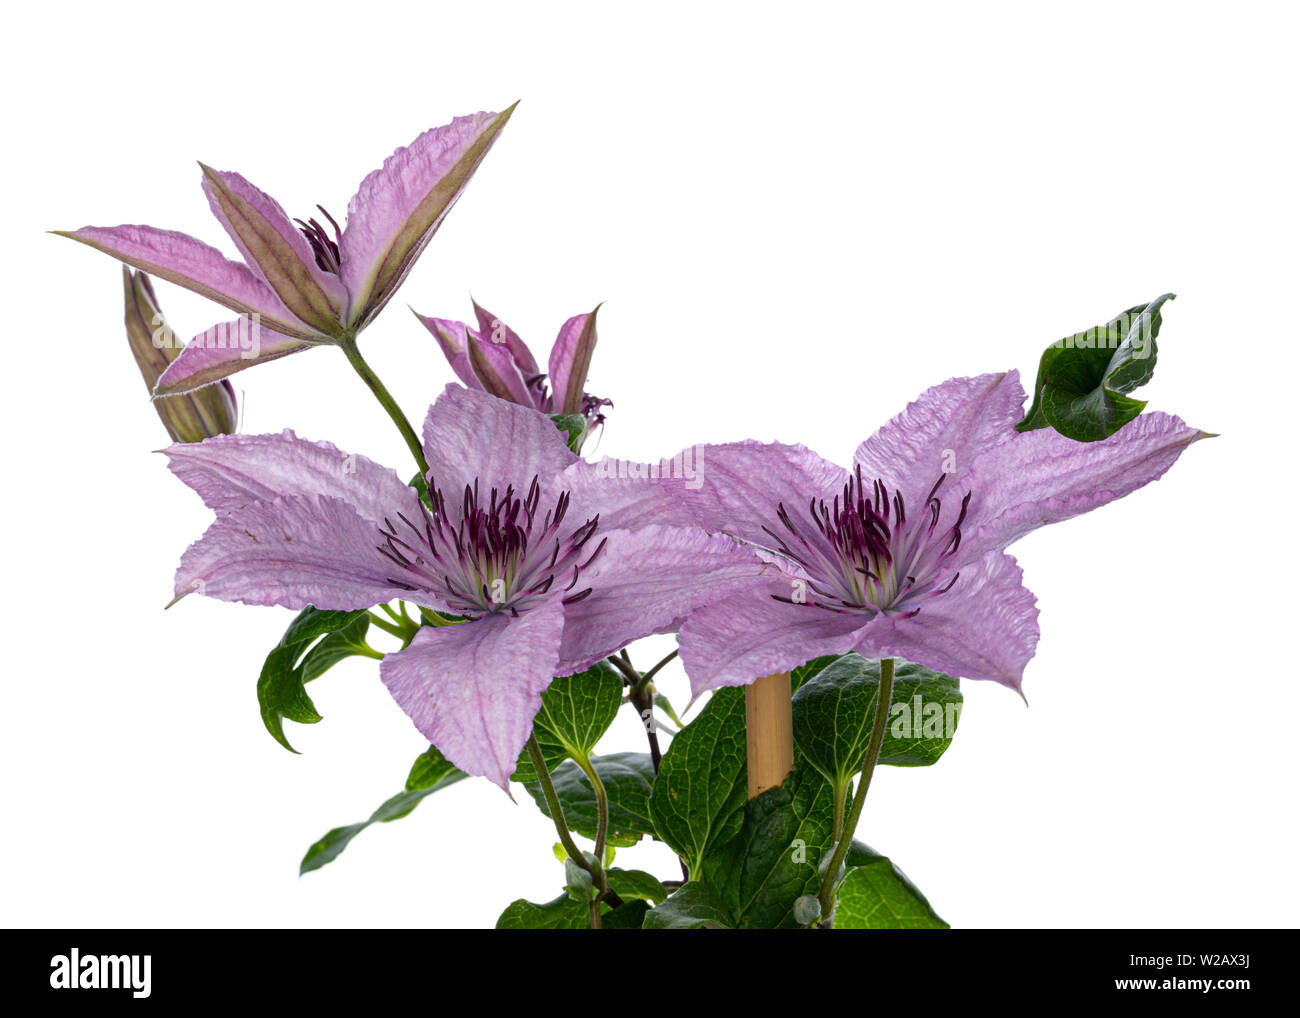 Lilac / pink blooming Clematis Hagley Hybrid flowers on branch with leafs. Isolated on white background. Stock Photo